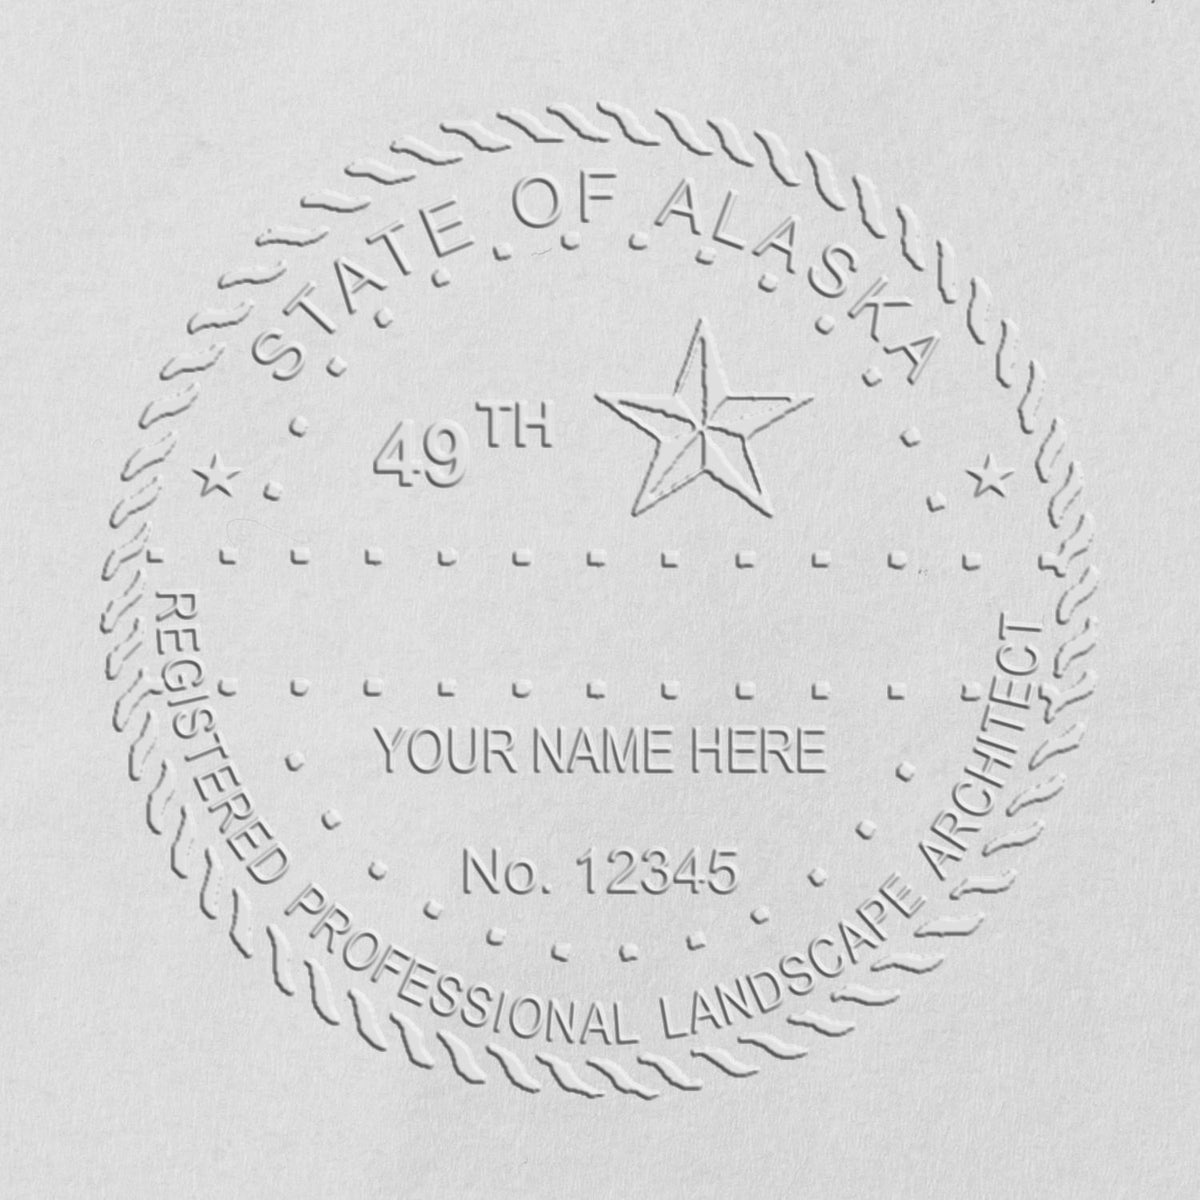 A photograph of the Hybrid Alaska Landscape Architect Seal stamp impression reveals a vivid, professional image of the on paper.